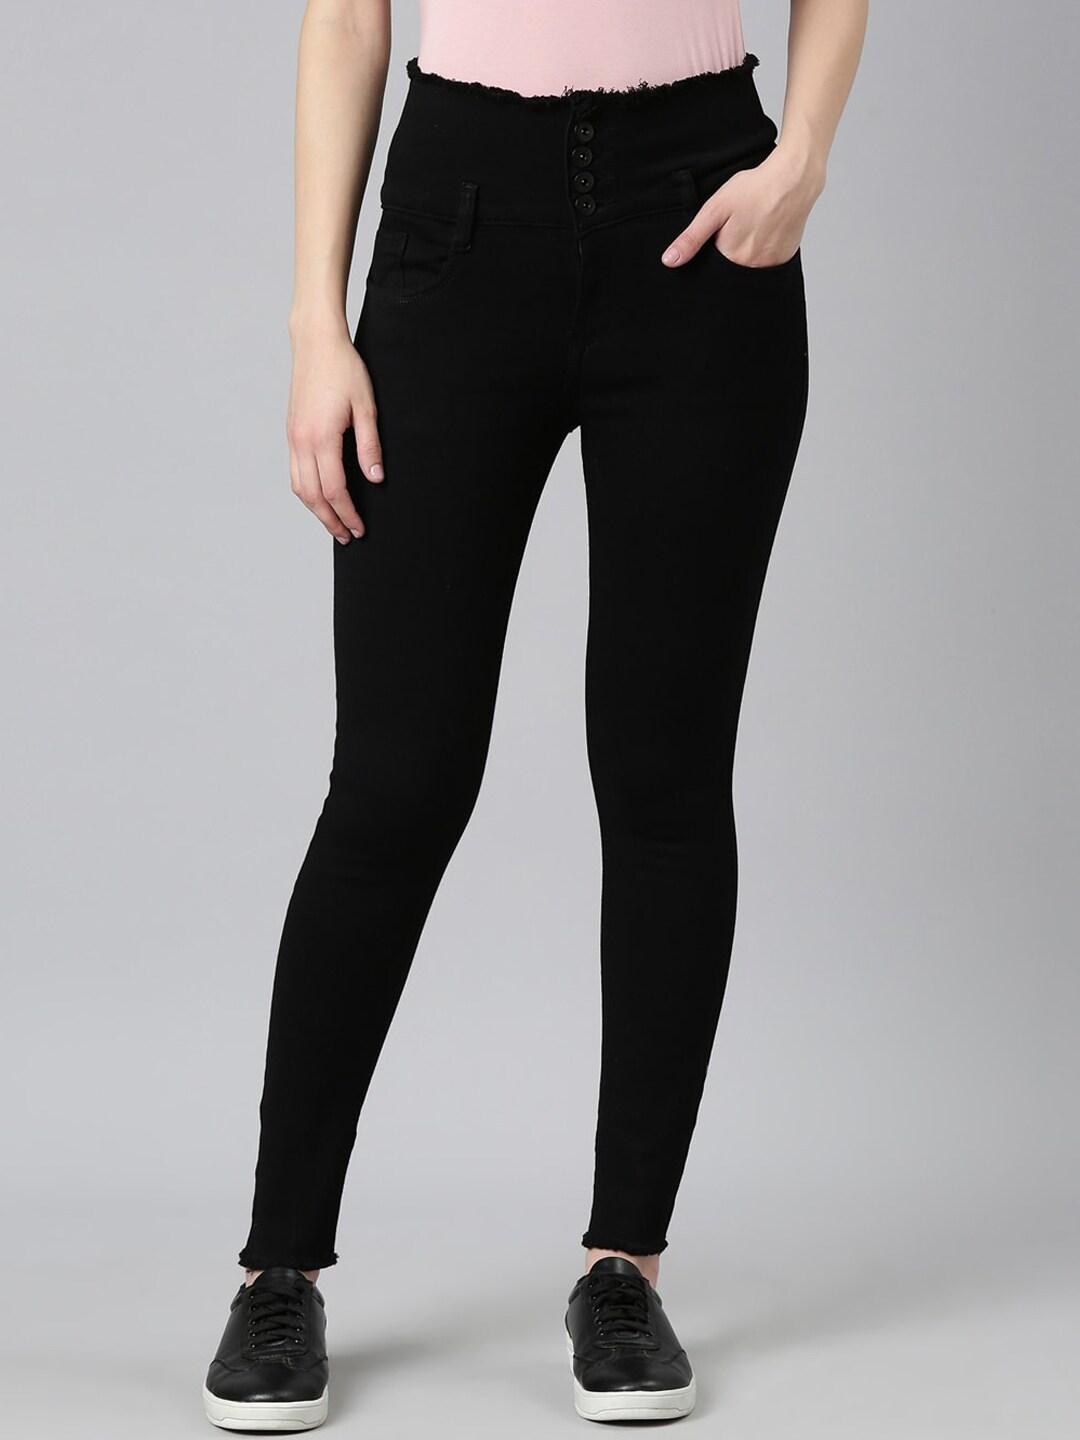 showoff-women-jean-super-skinny-mid-rise-fit-acid-wash-stretchable-clean-look-cotton-jeans